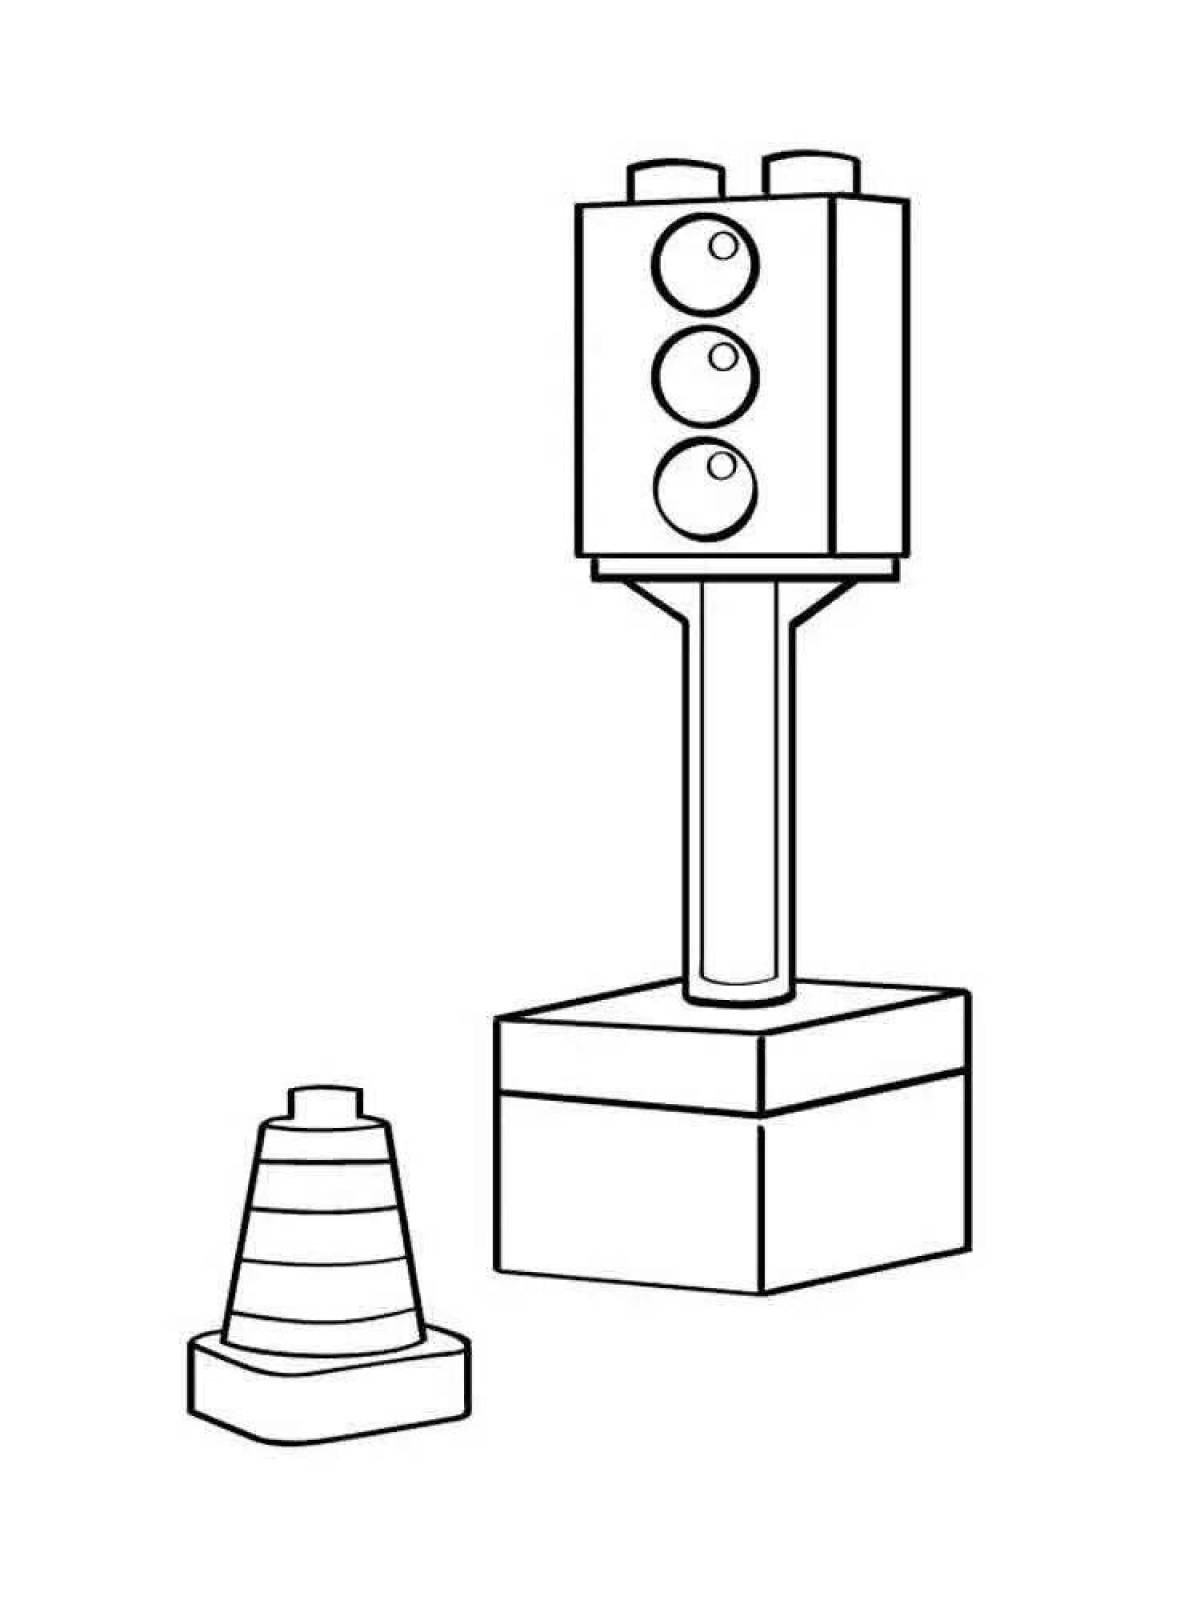 Gorgeous traffic light coloring page